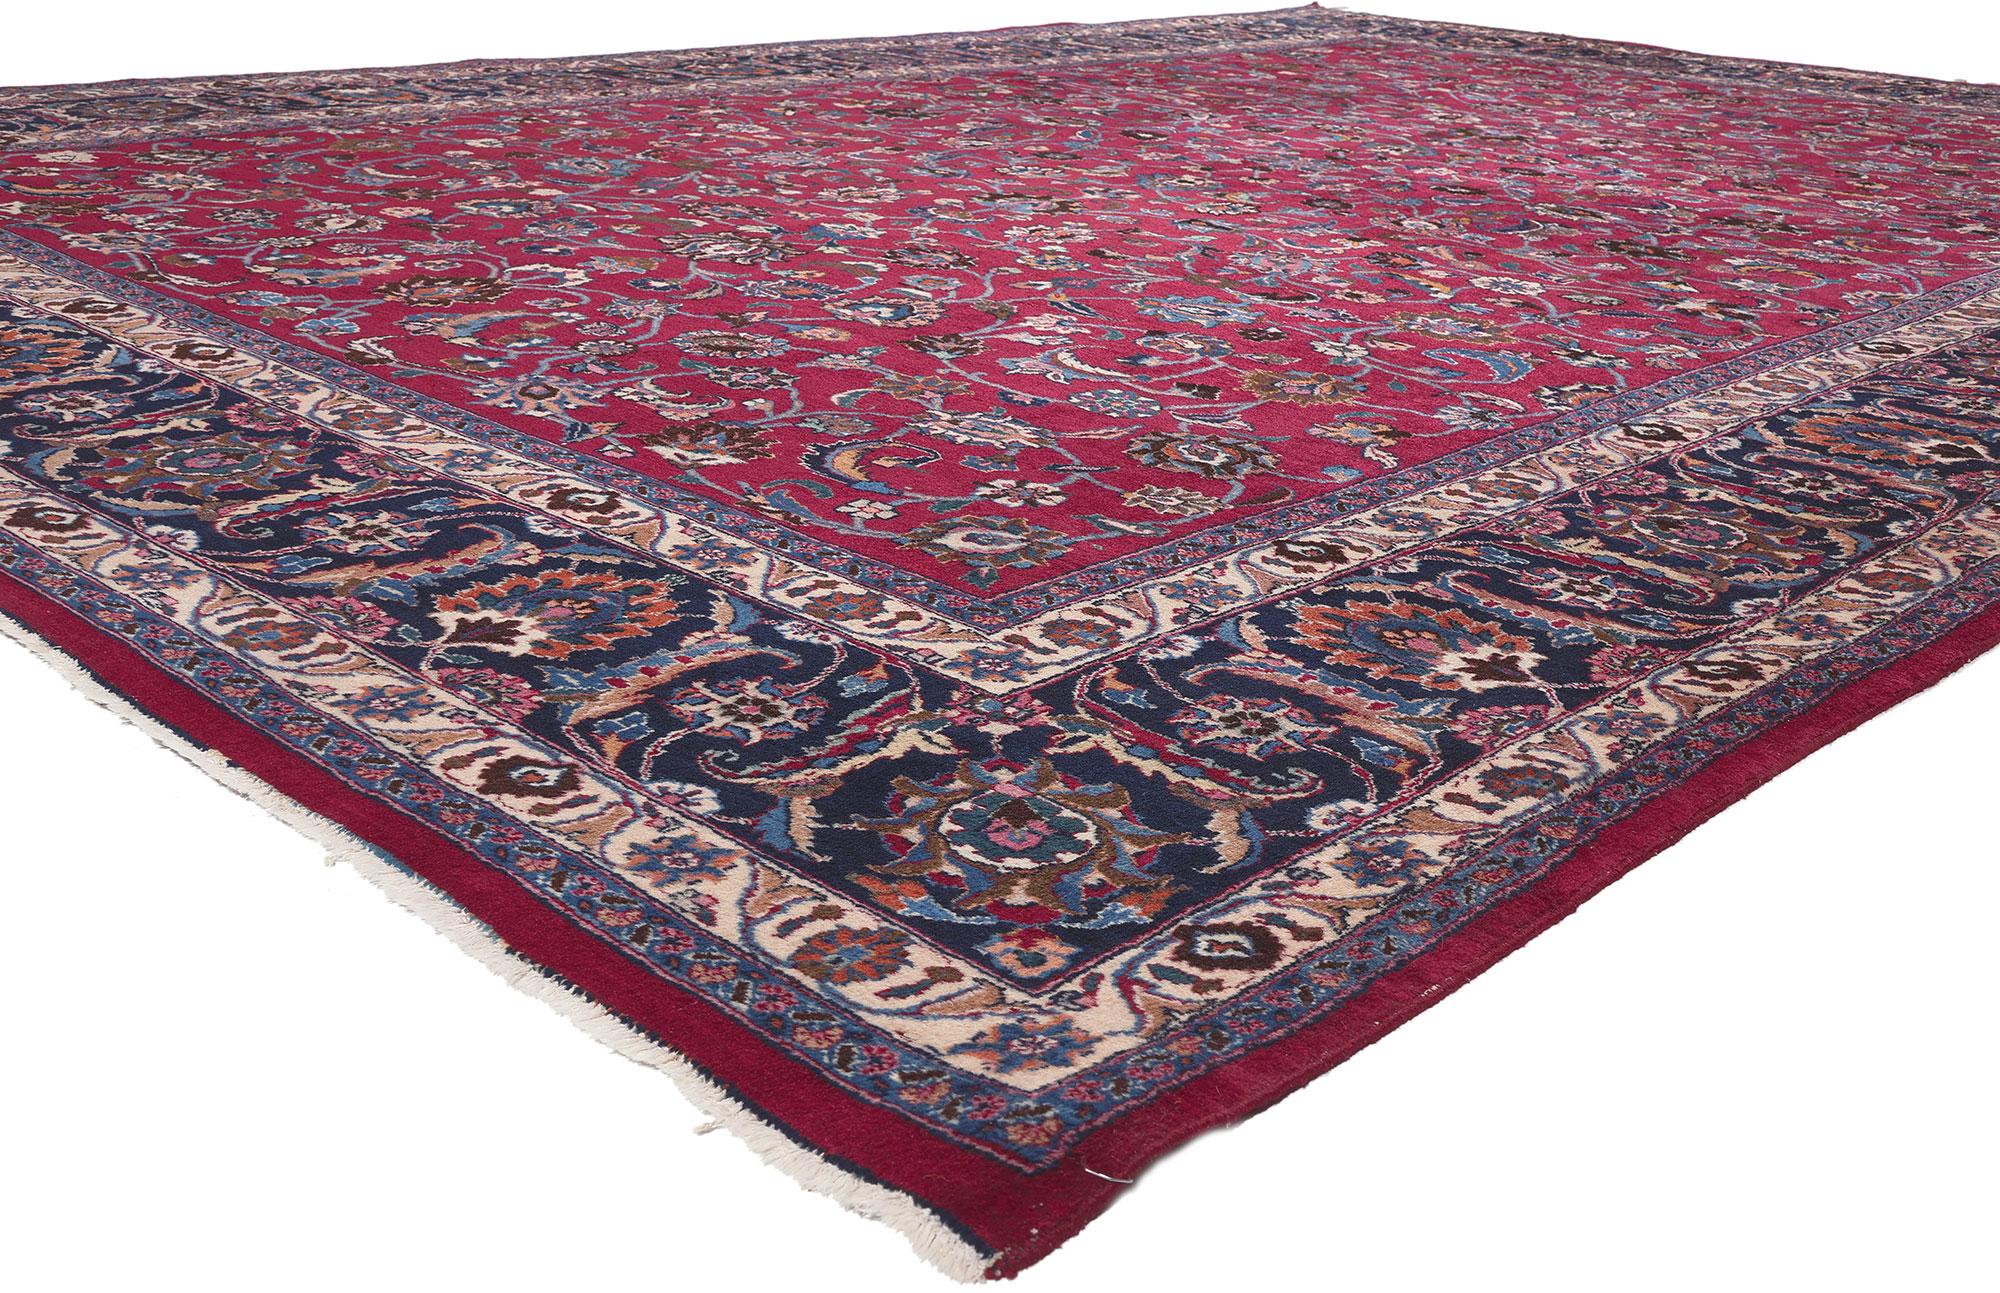 78568 Antique Persian Mashhad Rug, 11'03 x 16'08. 
Emulating stately decadence with incredible detail and texture, this hand knotted wool antique Persian Mashhad rug is poised to impress. The intricate botanical design and sophisticated colorway